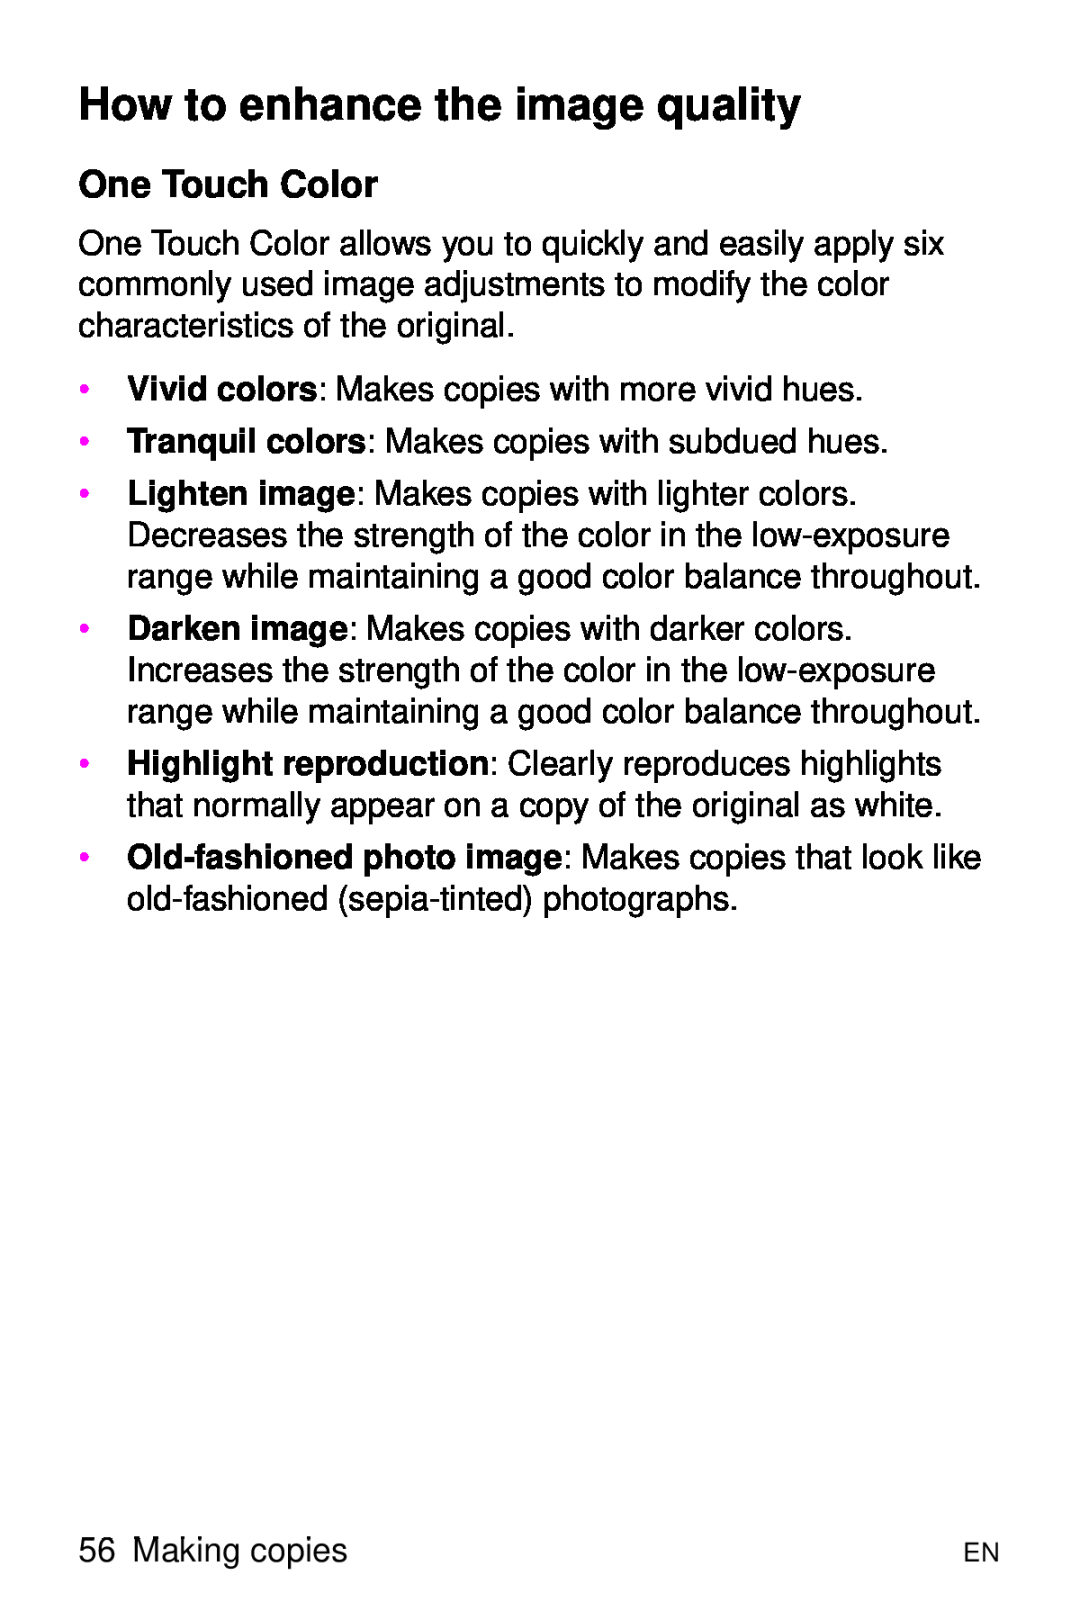 HP 8000 s manual How to enhance the image quality, One Touch Color 